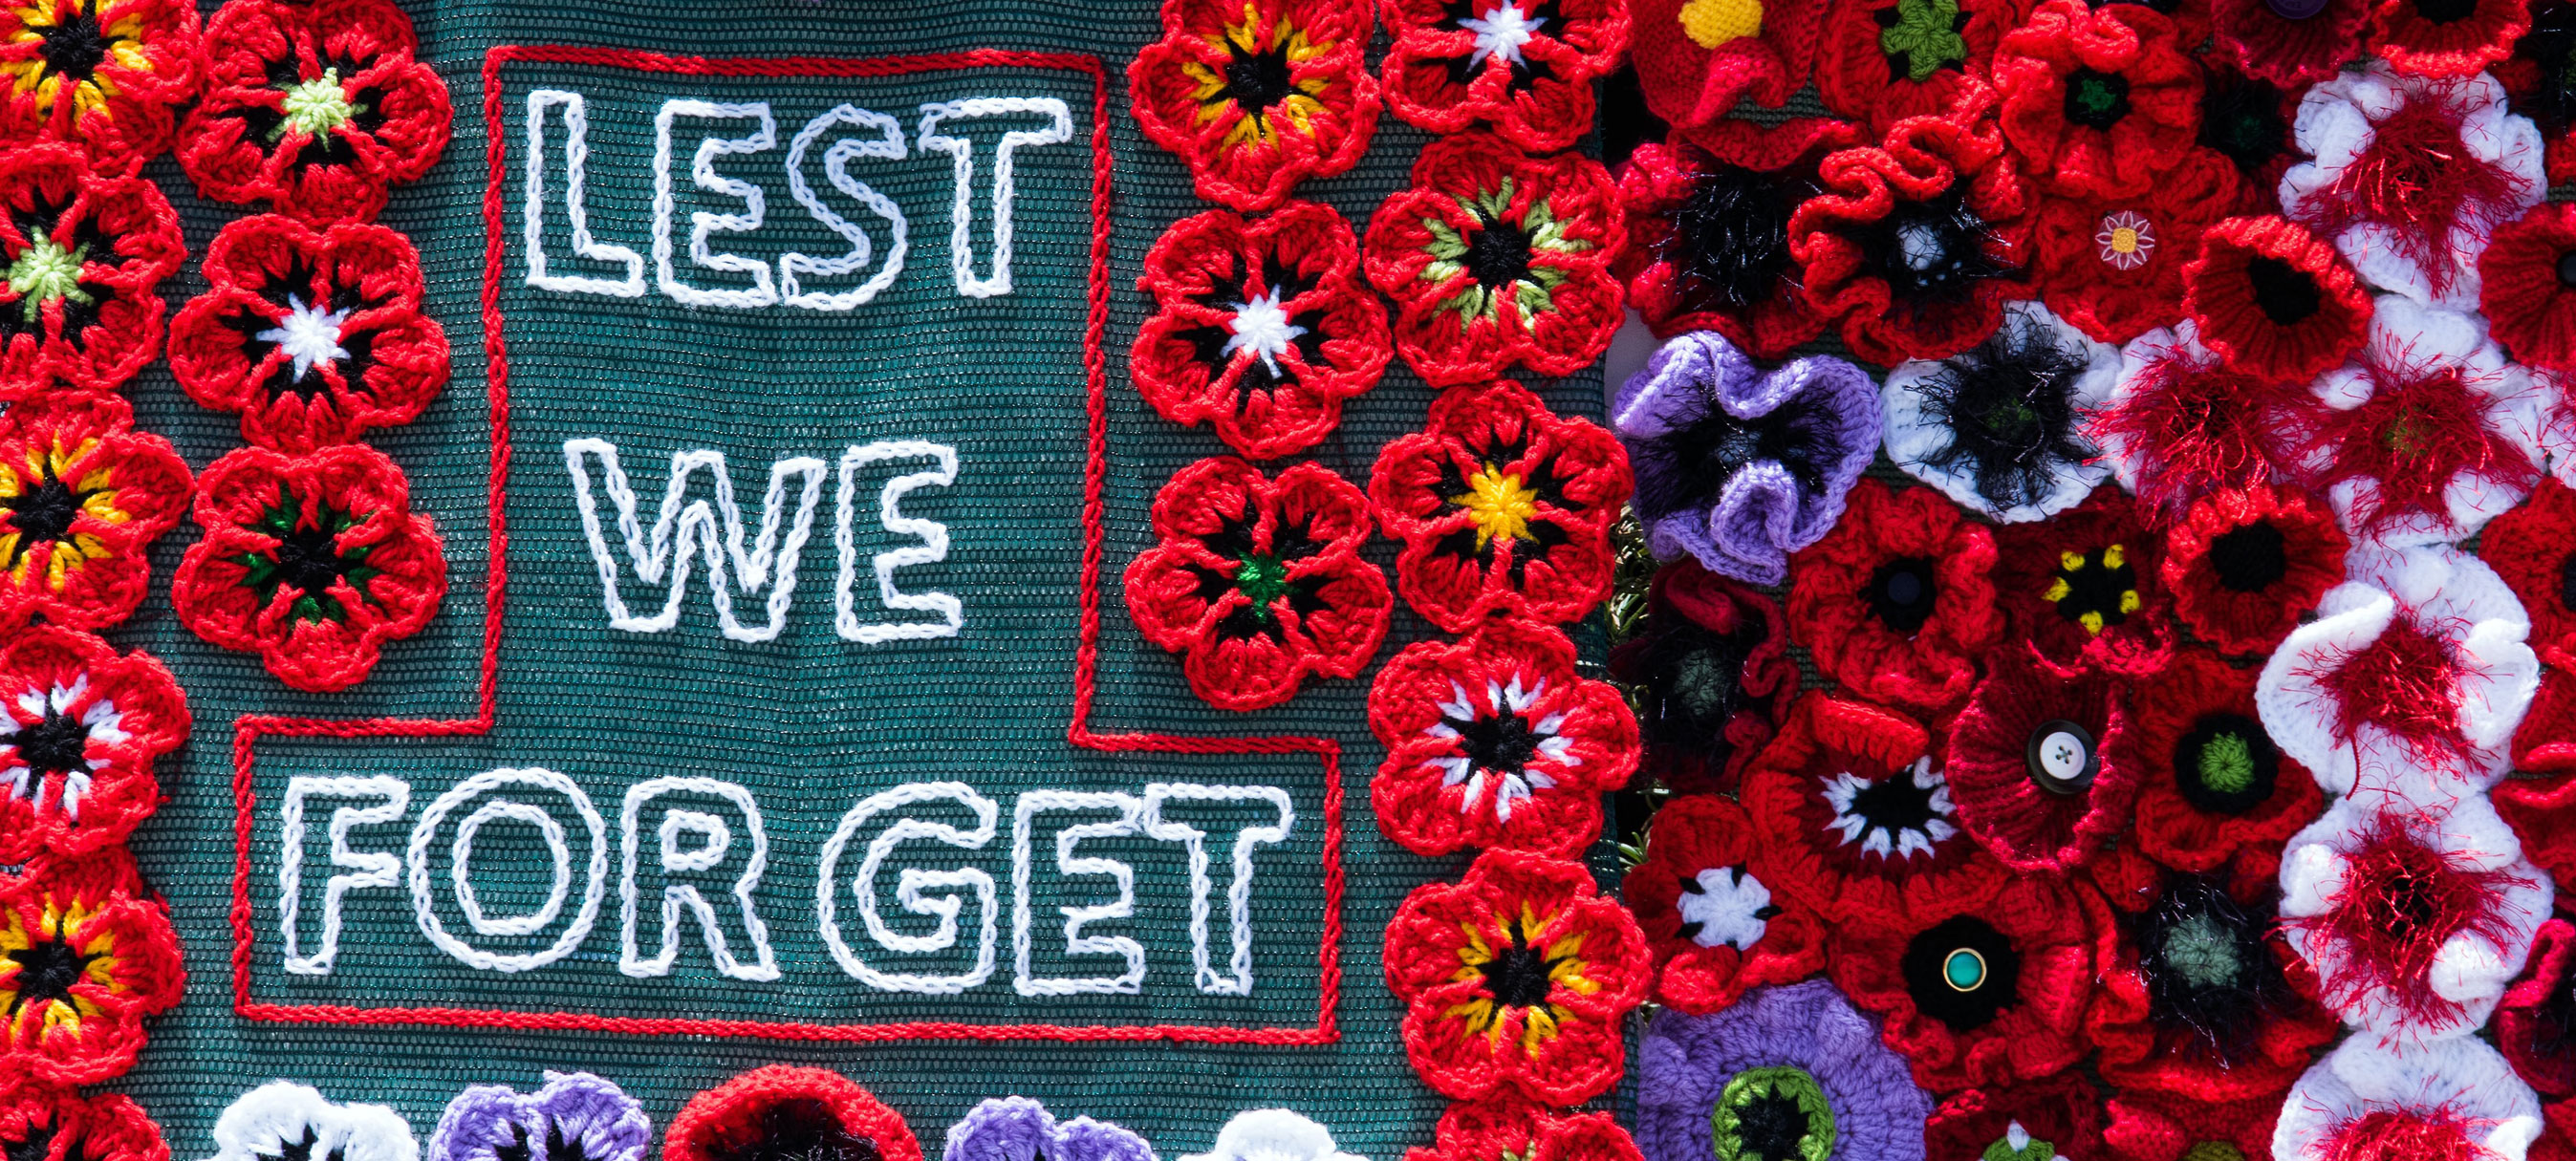 lest we forget by david clode